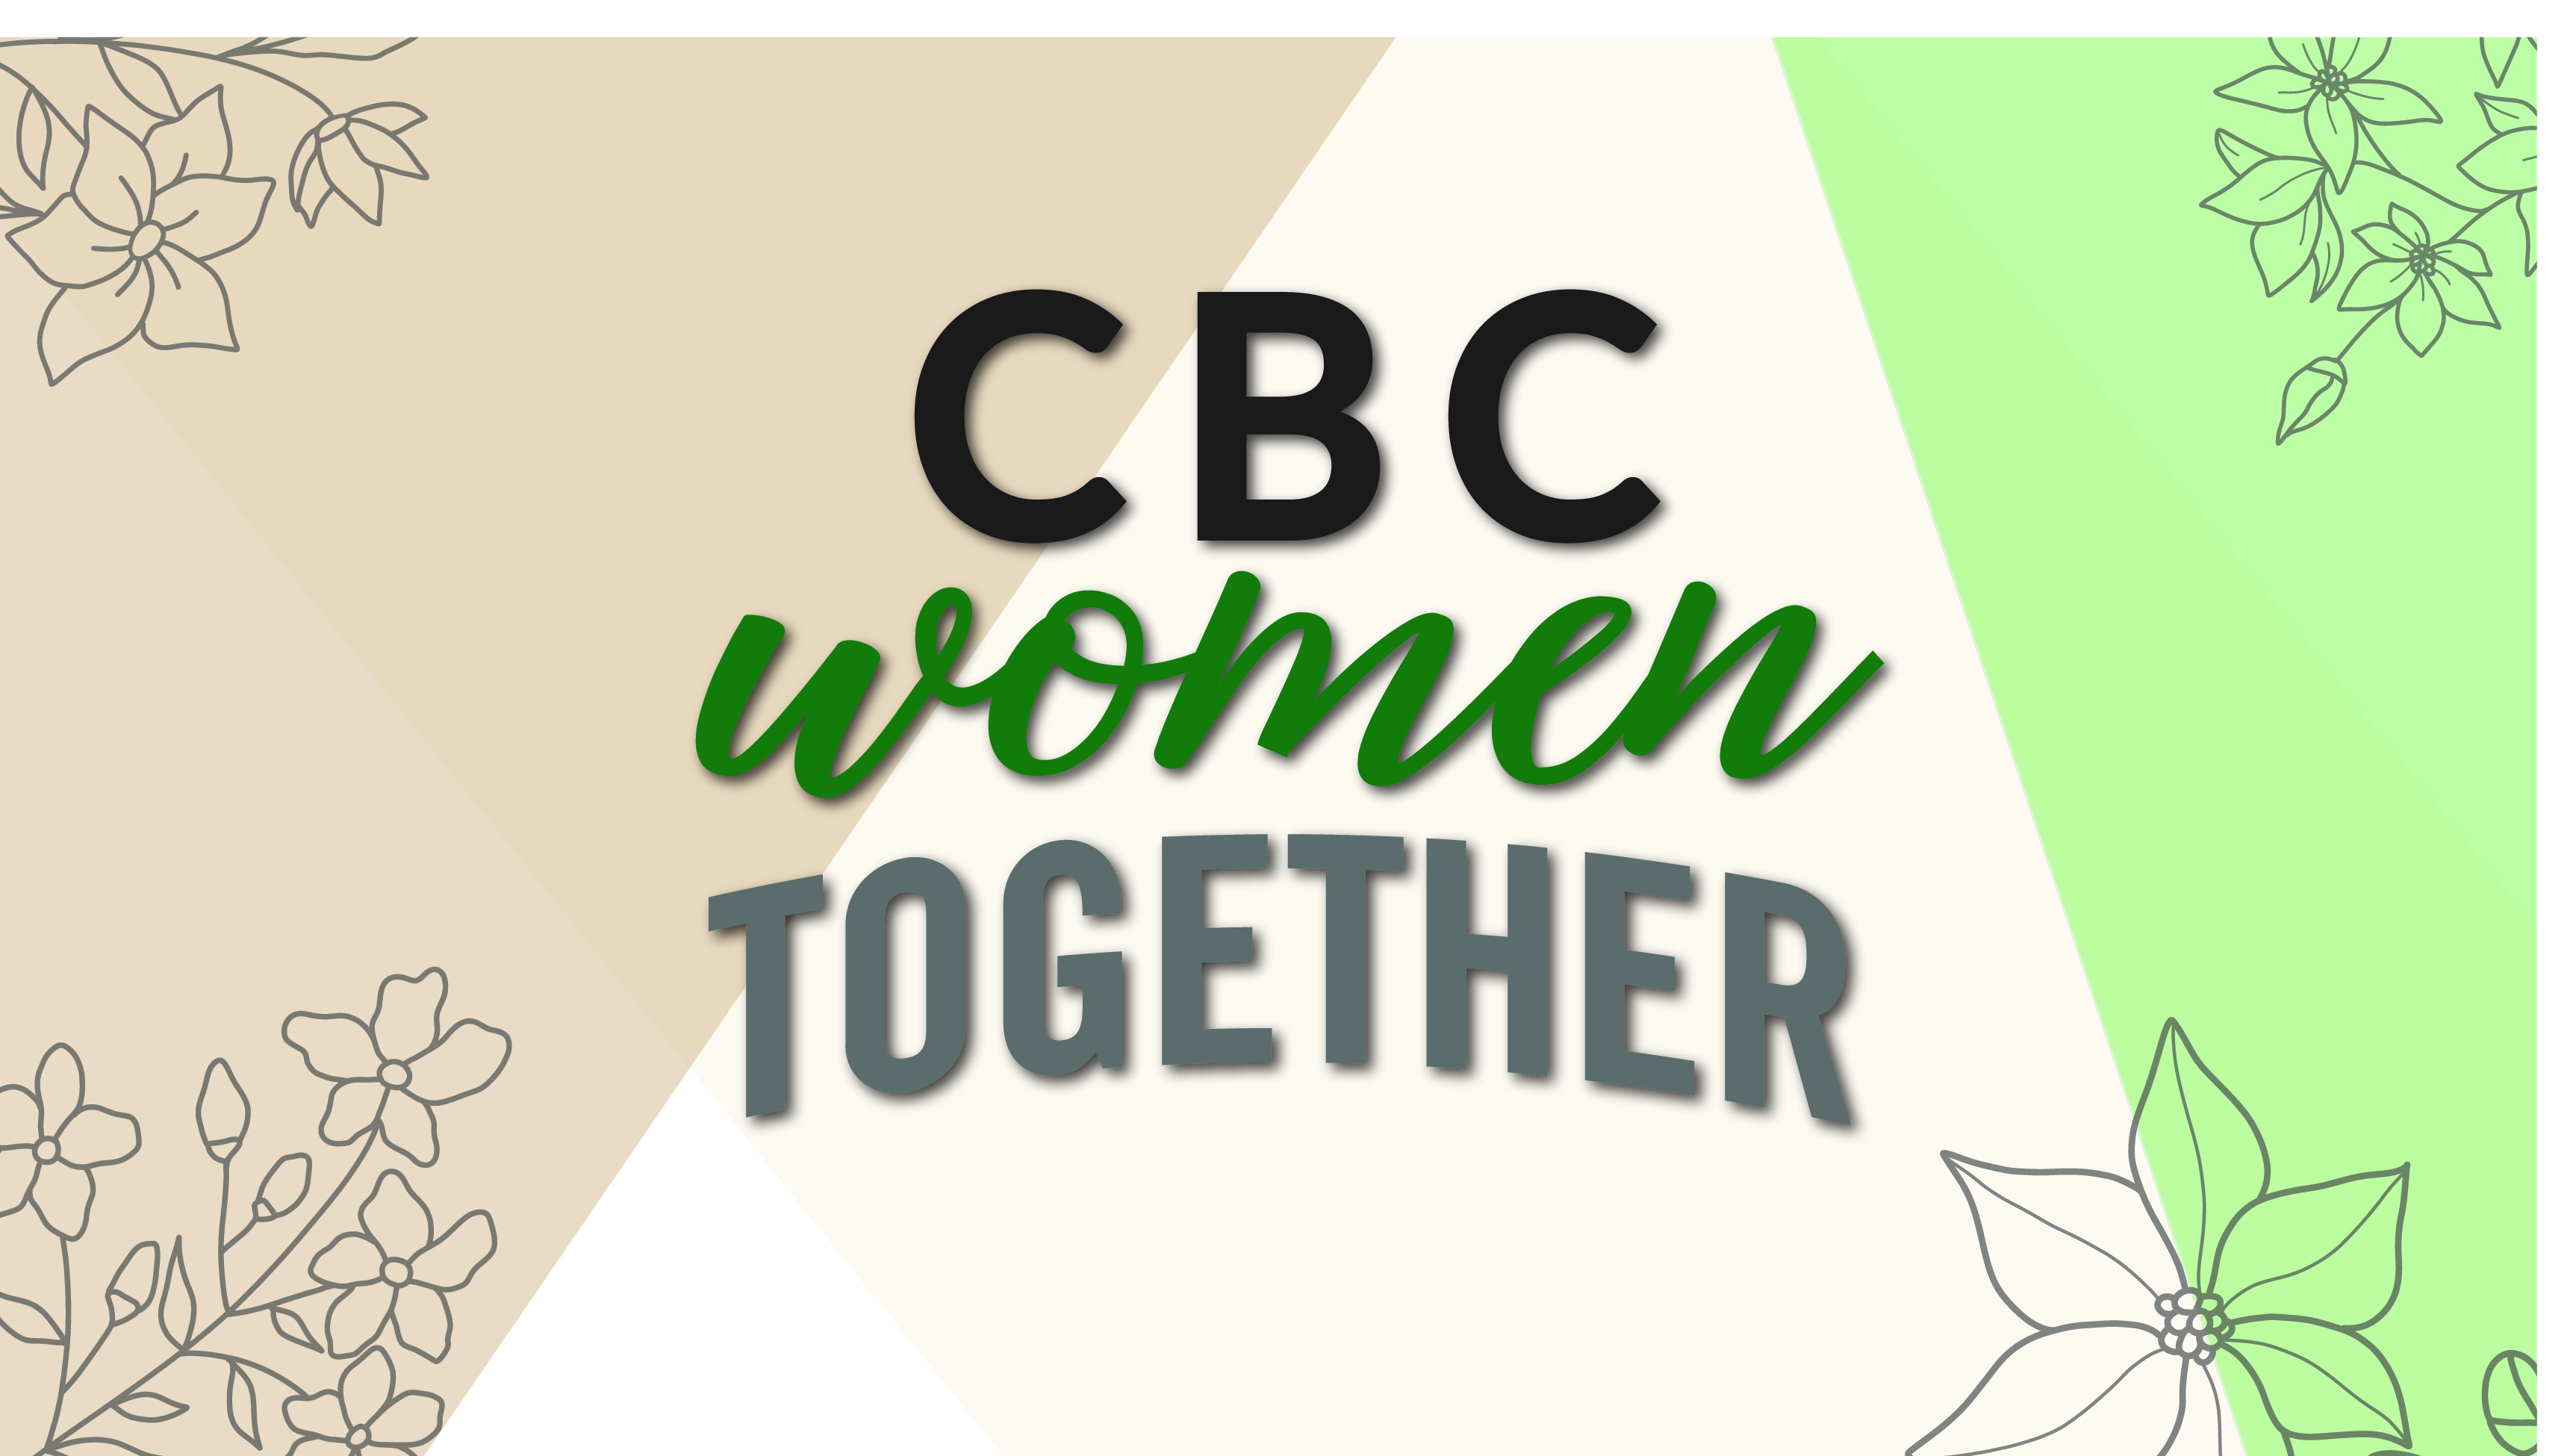 CBC WOMEN TOGETHER-01 image